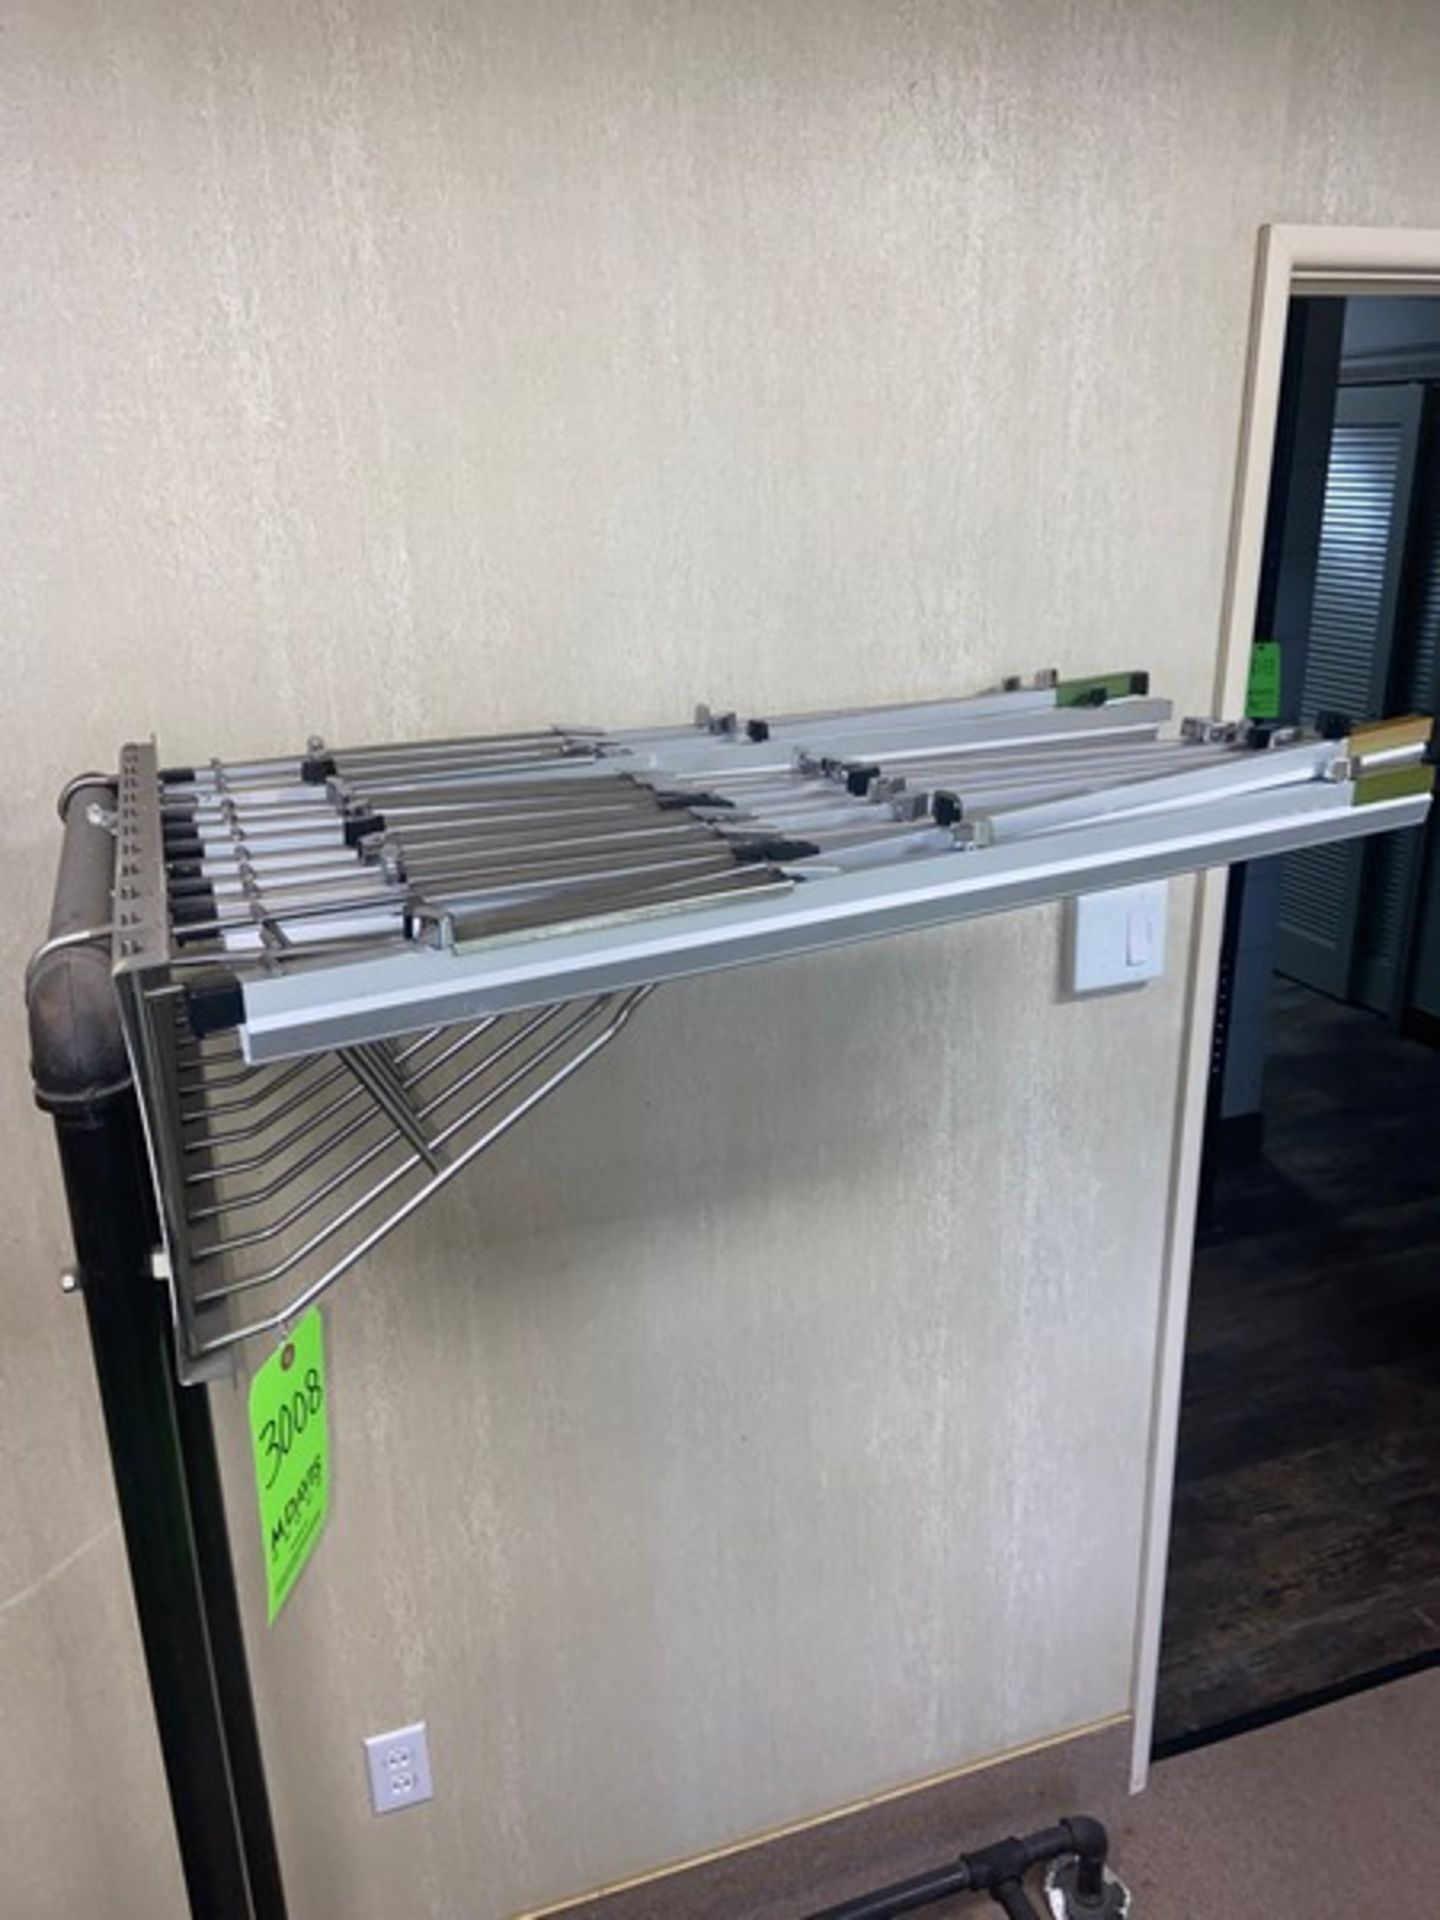 Engineer Drawing Rack, Mounted on Portable Frame (LOCATED IN MONROEVILLE, PA) - Image 2 of 2